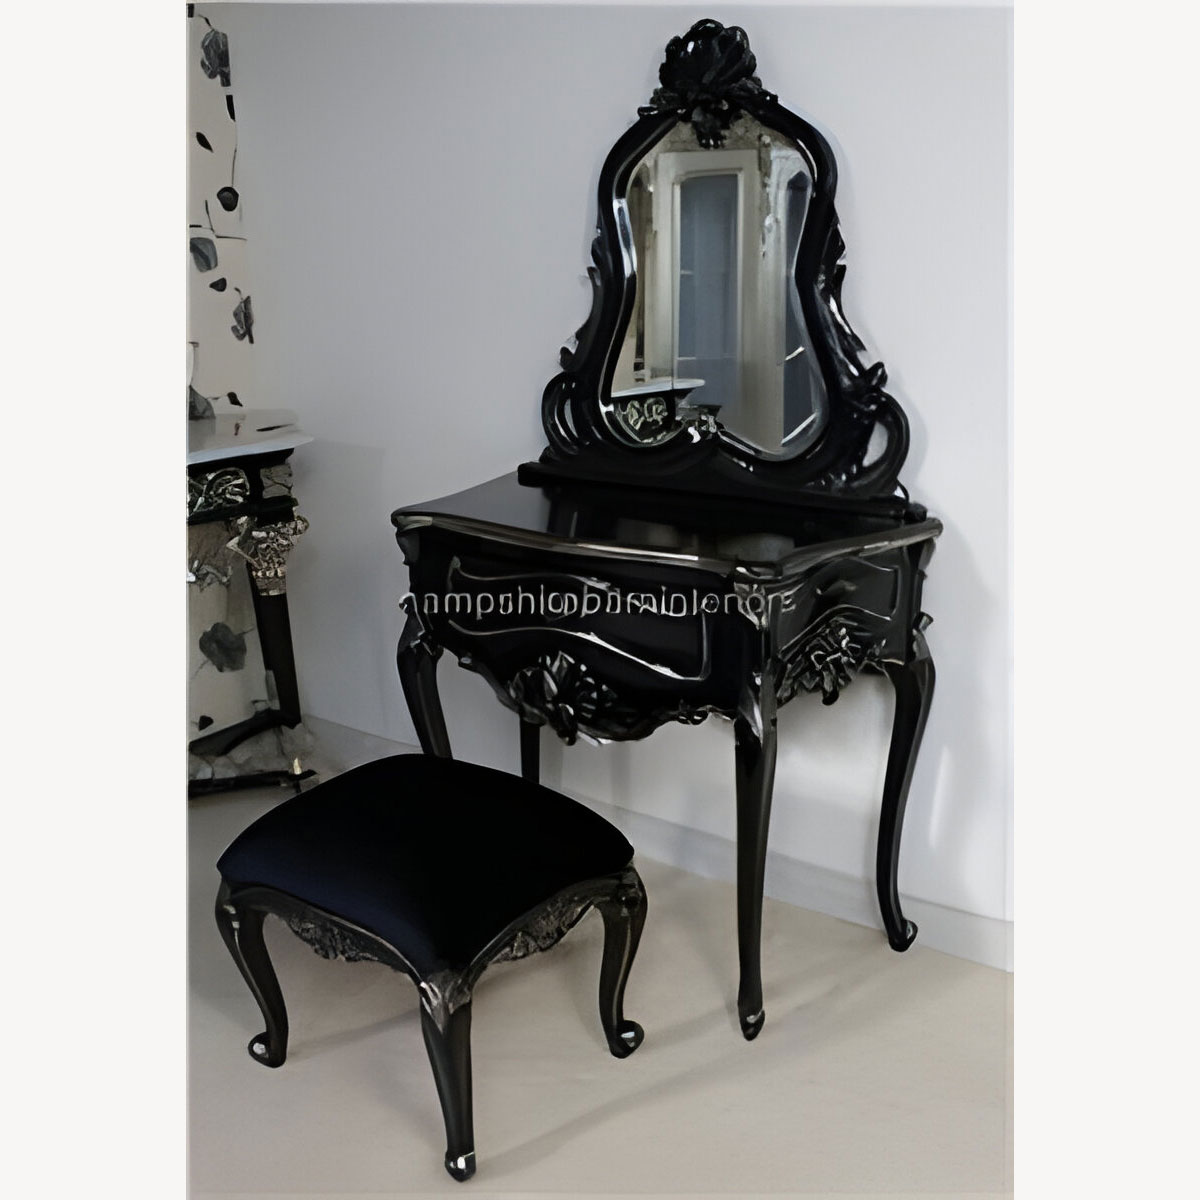 Belgravia Dressing Table Stool Shown In Silvered Black Finish Others Colours To Made To Order 1 - Hampshire Barn Interiors - Belgravia Dressing Table & Stool Shown In Silvered Black Finish Others Colours To Made To Order -